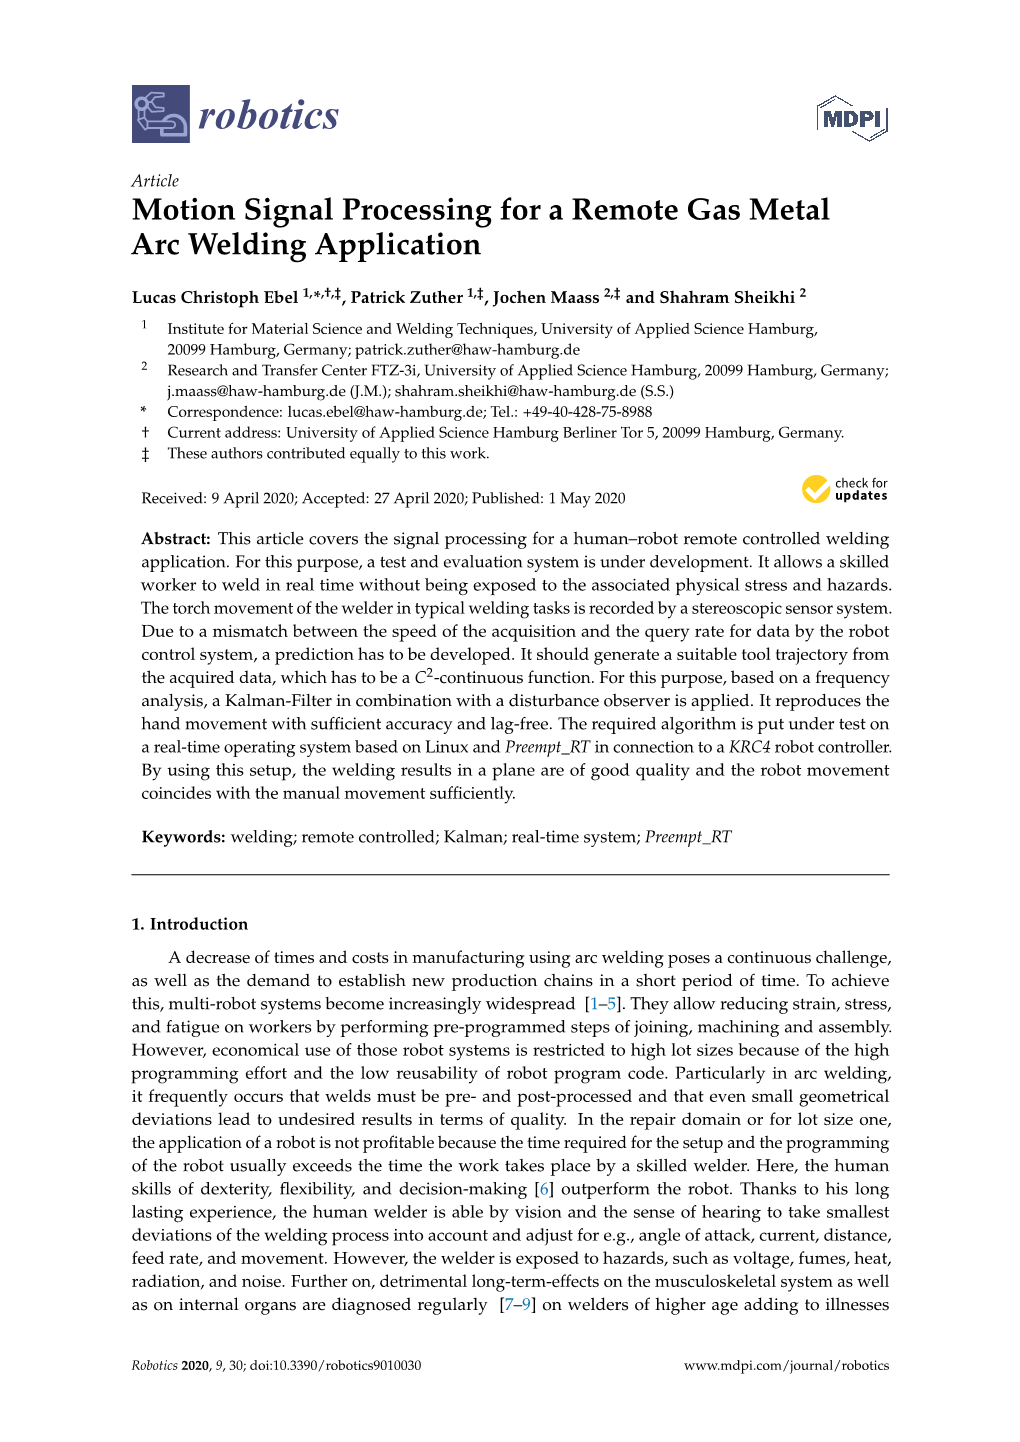 Motion Signal Processing for a Remote Gas Metal Arc Welding Application